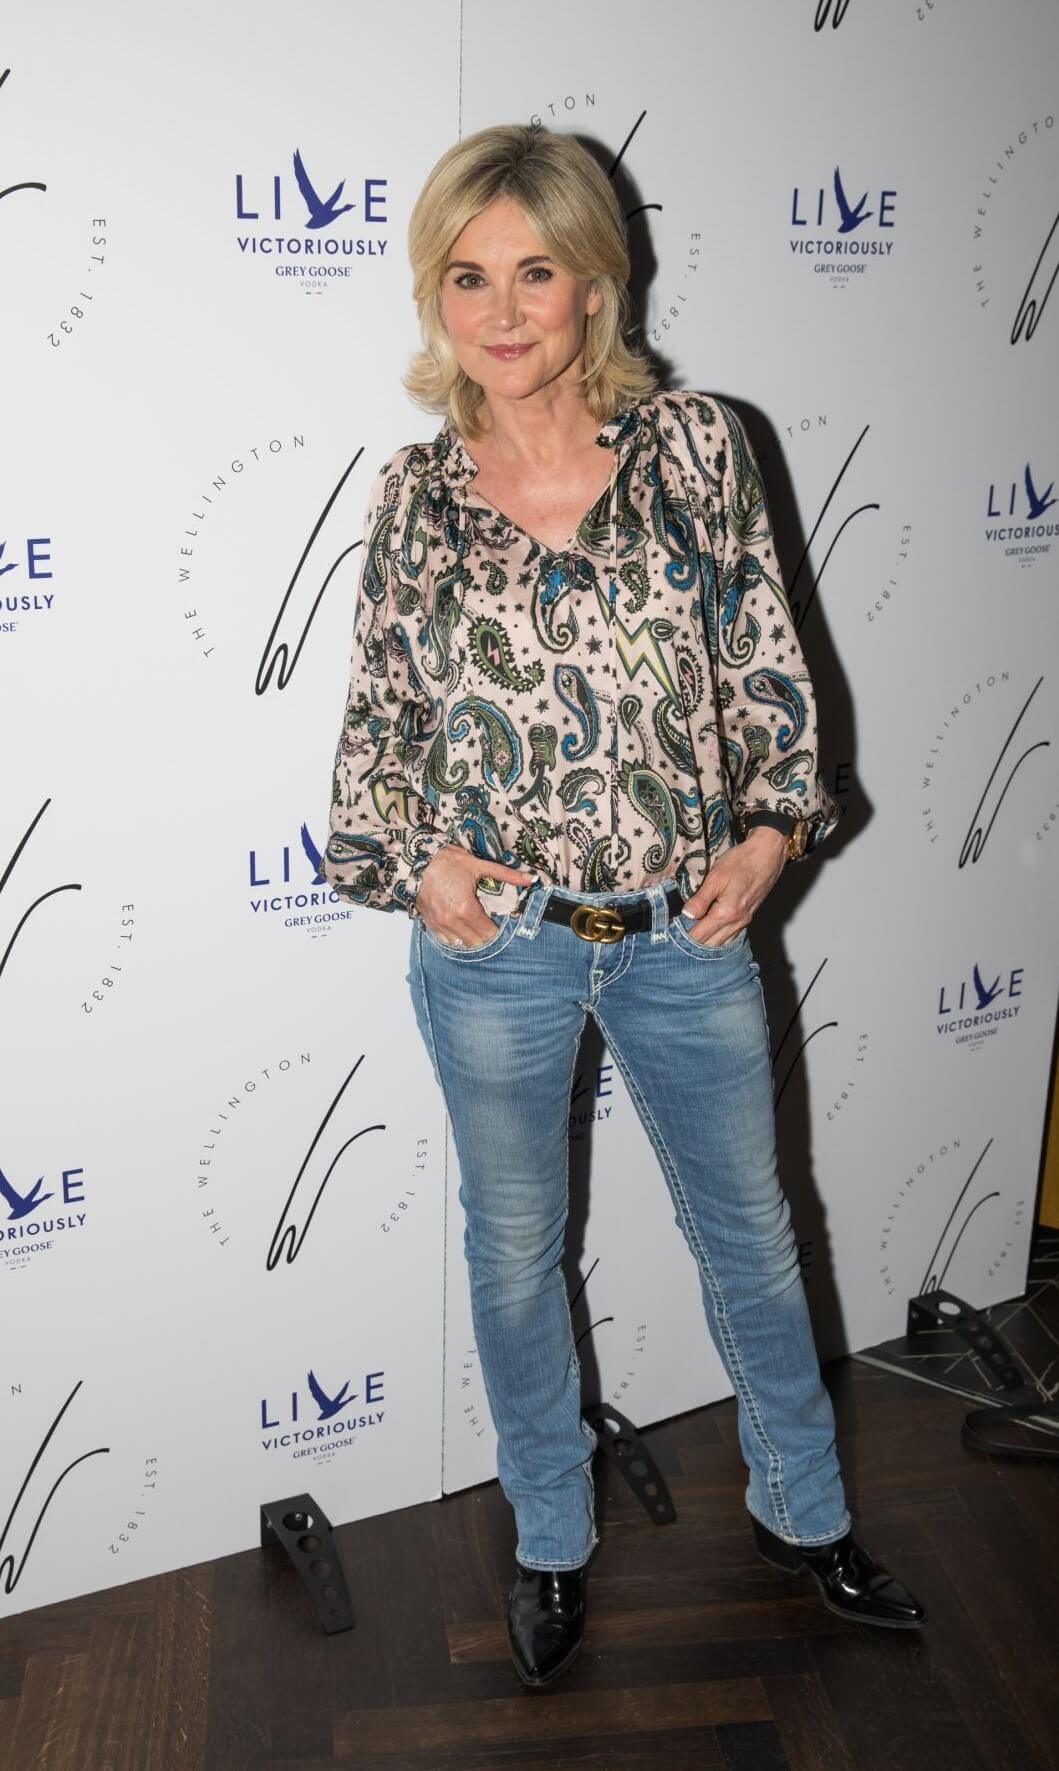 Anthea Turner  In Printed Embroidery Full Sleeves Top With Blue Denim Jeans At The Gatekeeper Novel Launch in London